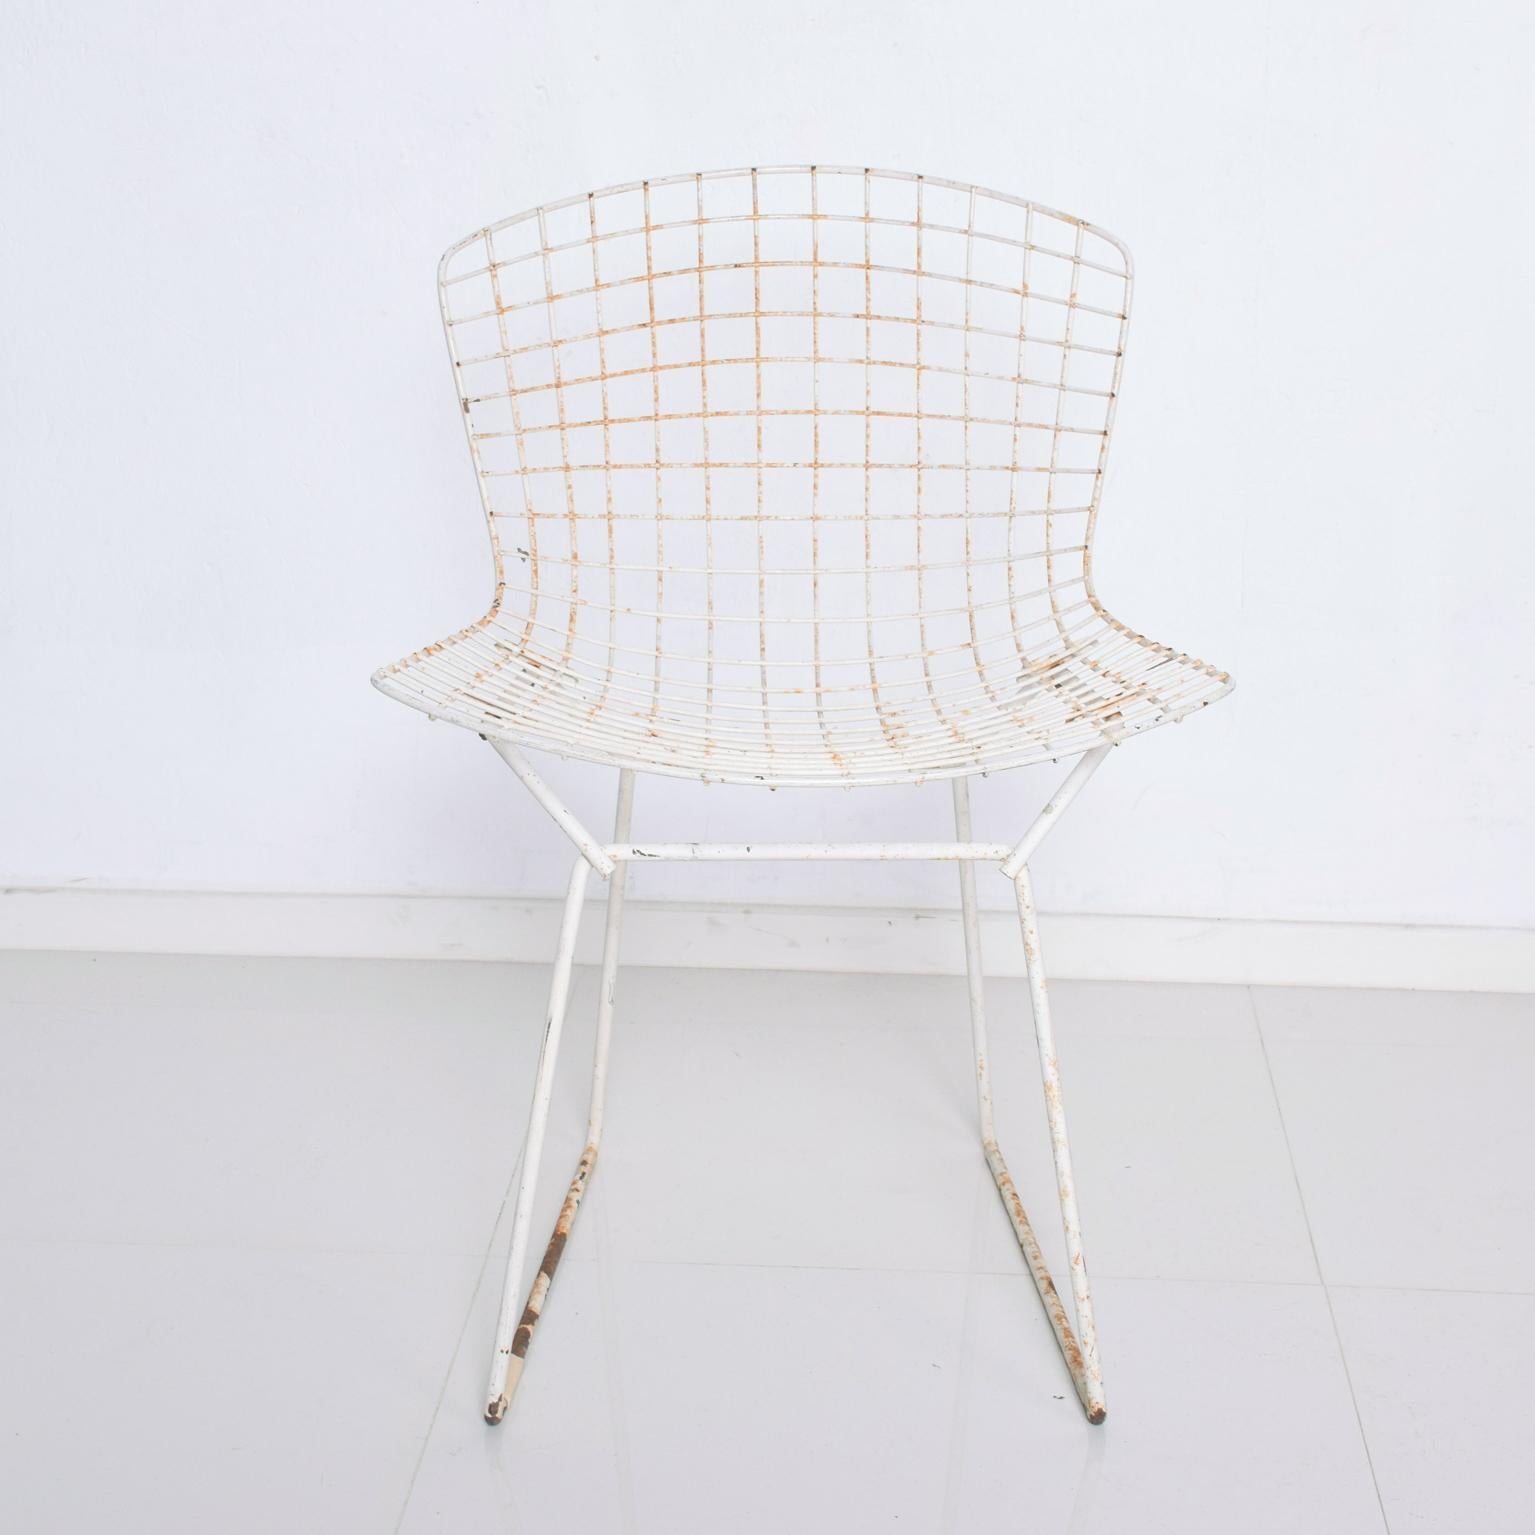 AMBIANIC offers
Classic Vintage Modern Industrial HARRY BERTOIA Wire Side Chair White 1952
Dimensions: 29.5 x 22.25 D x 18 W
Original unrestored preowned vintage condition.
Please refer to the images. See wear and use present.
Delivery to LA